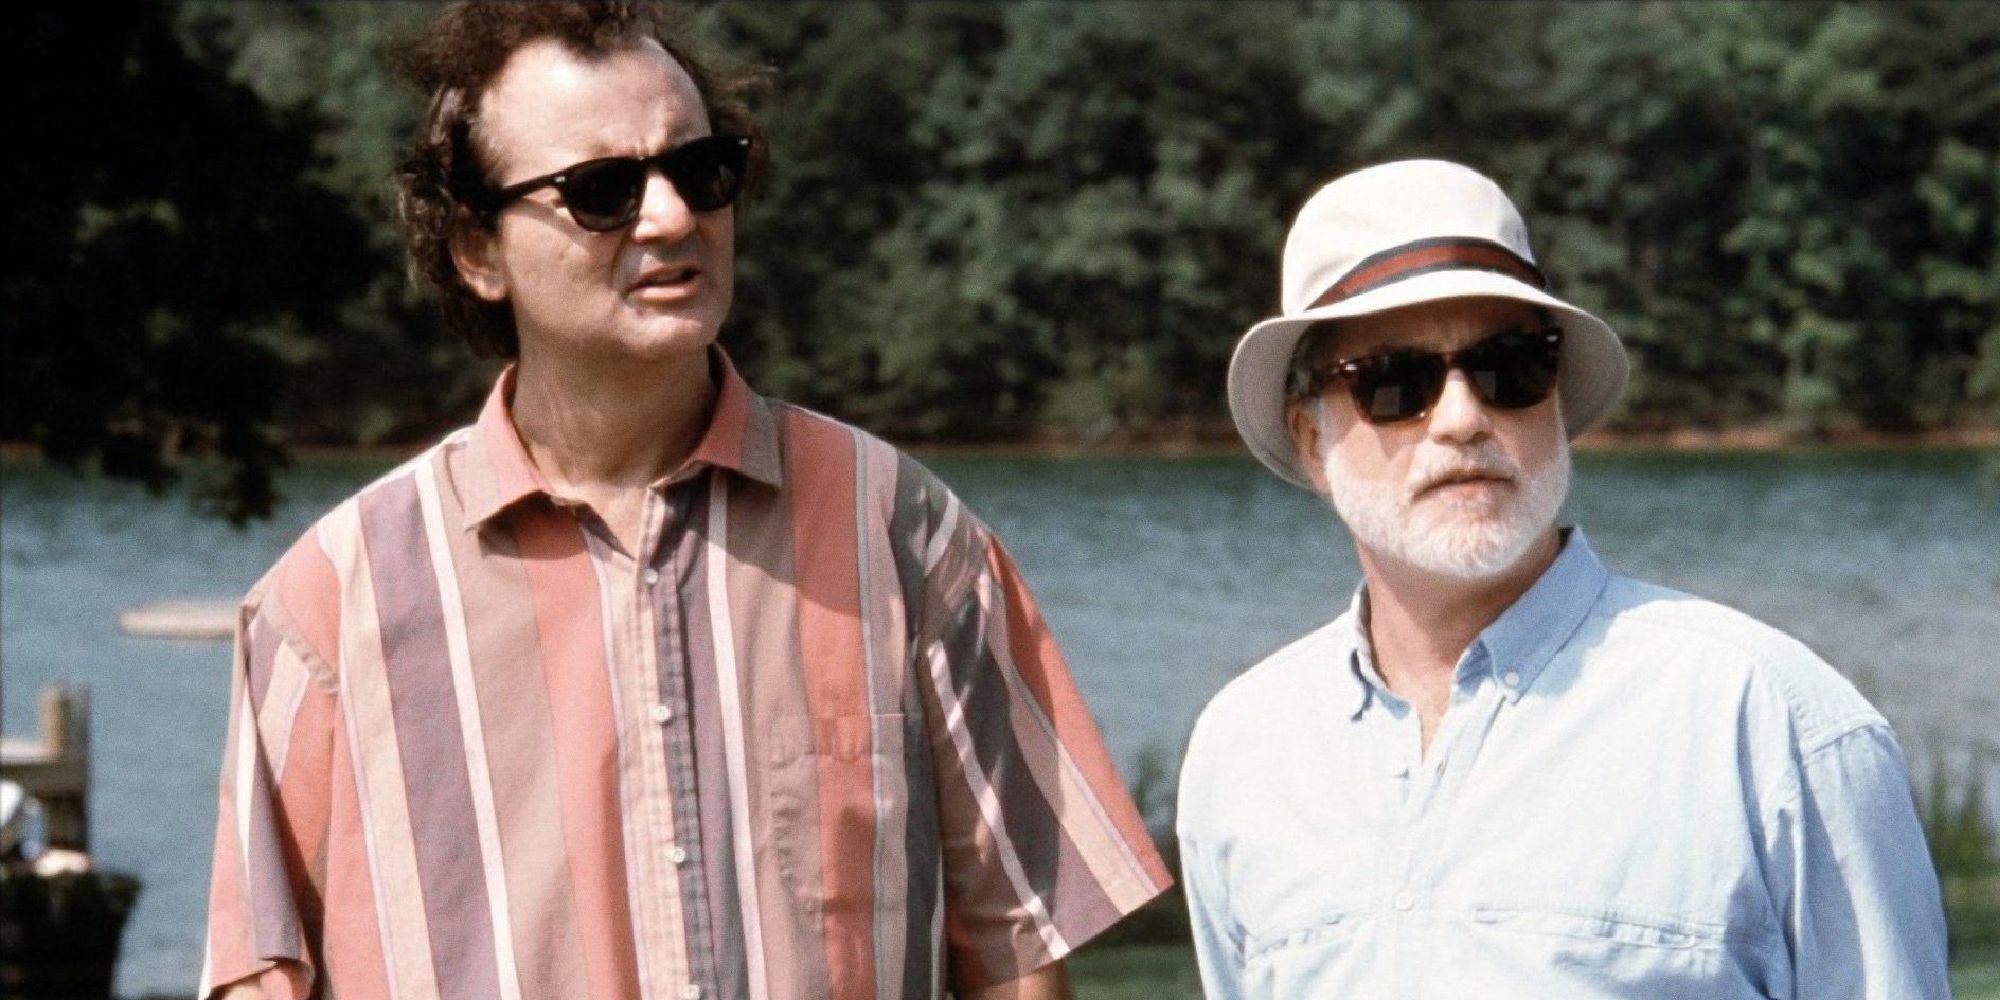 Bill Murray and Richard Dreyfuss with sunglasses on in What About Bob